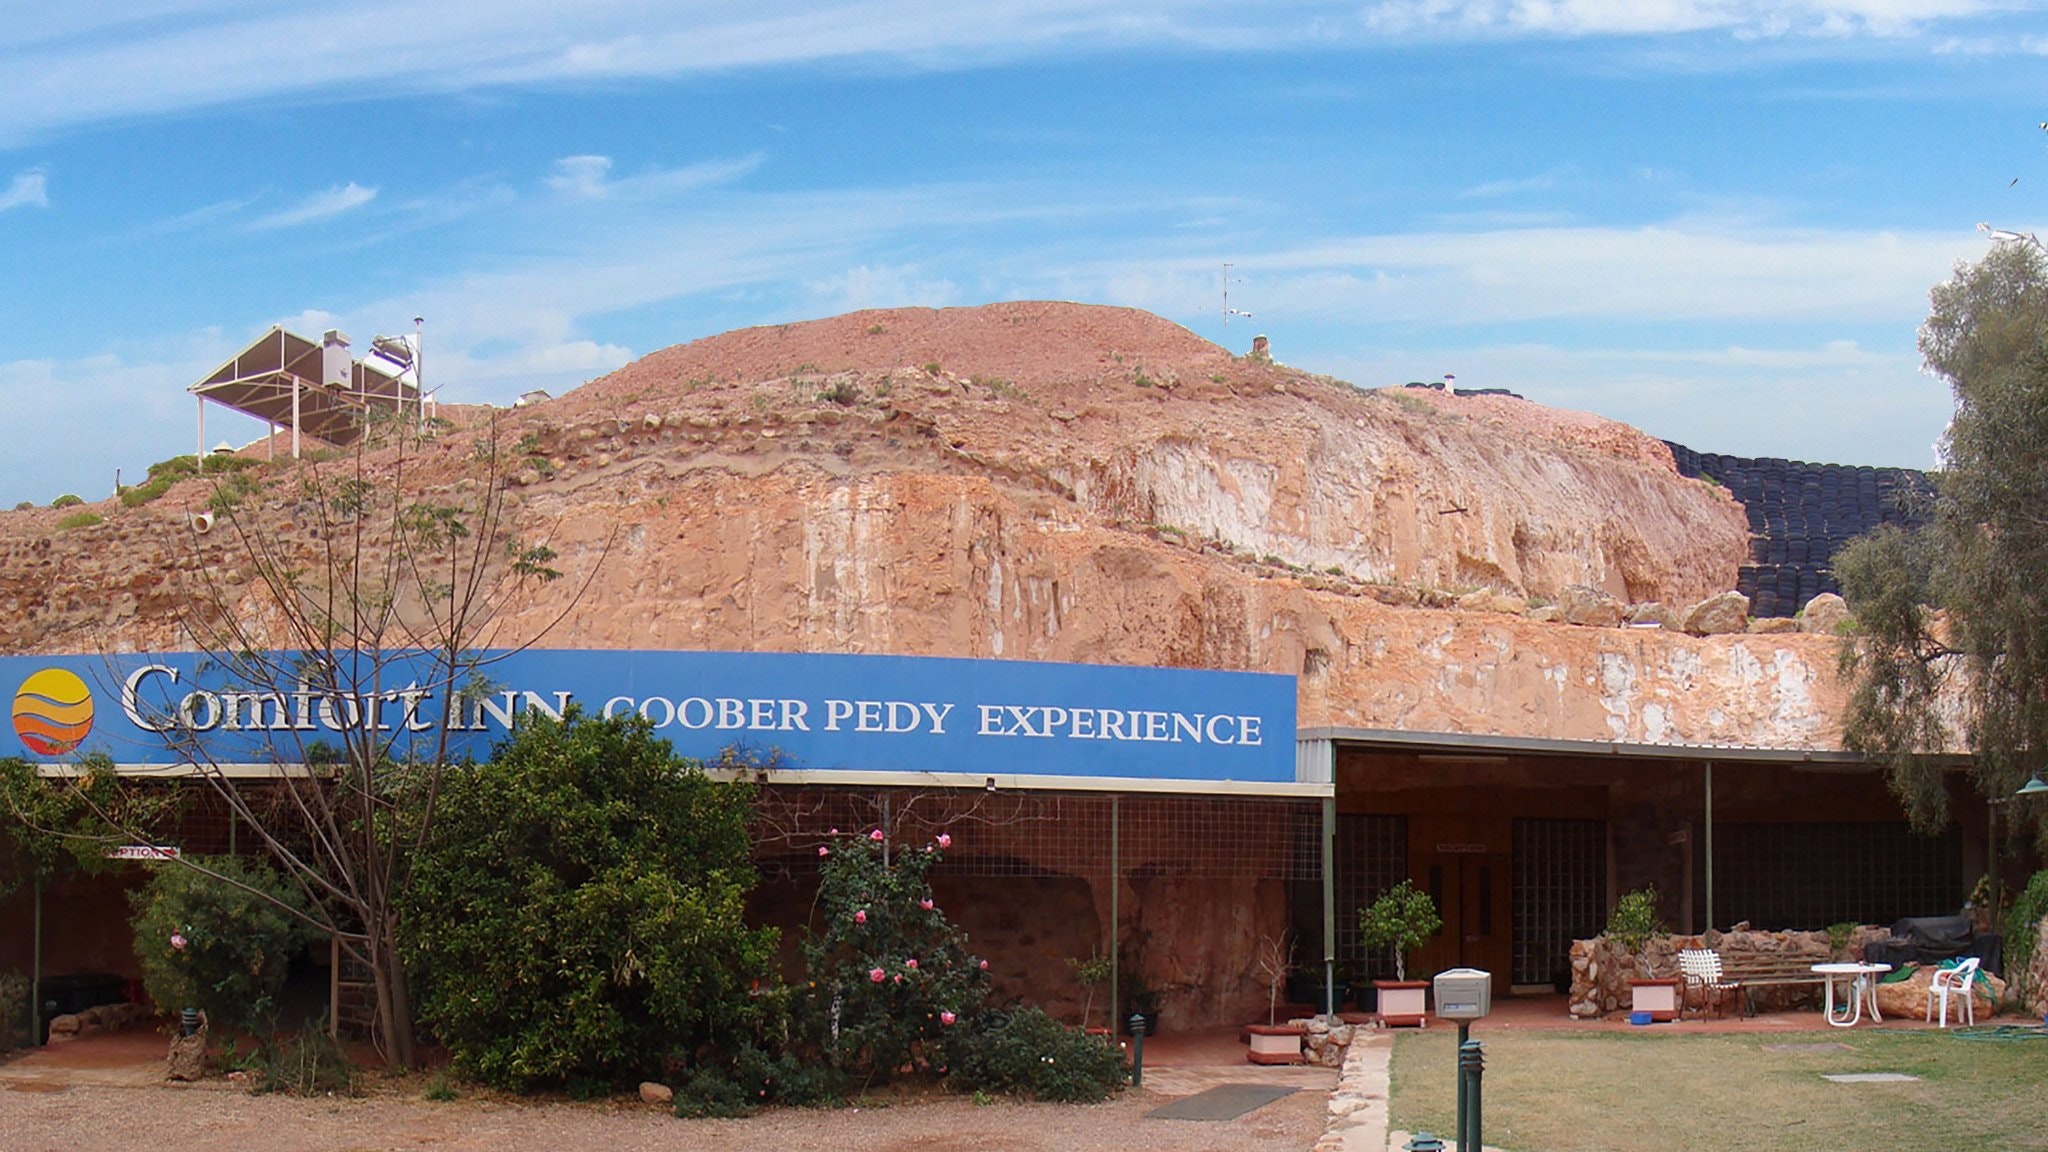 Comfort Inn Coober Pedy Experience Motel - New South Wales Tourism 